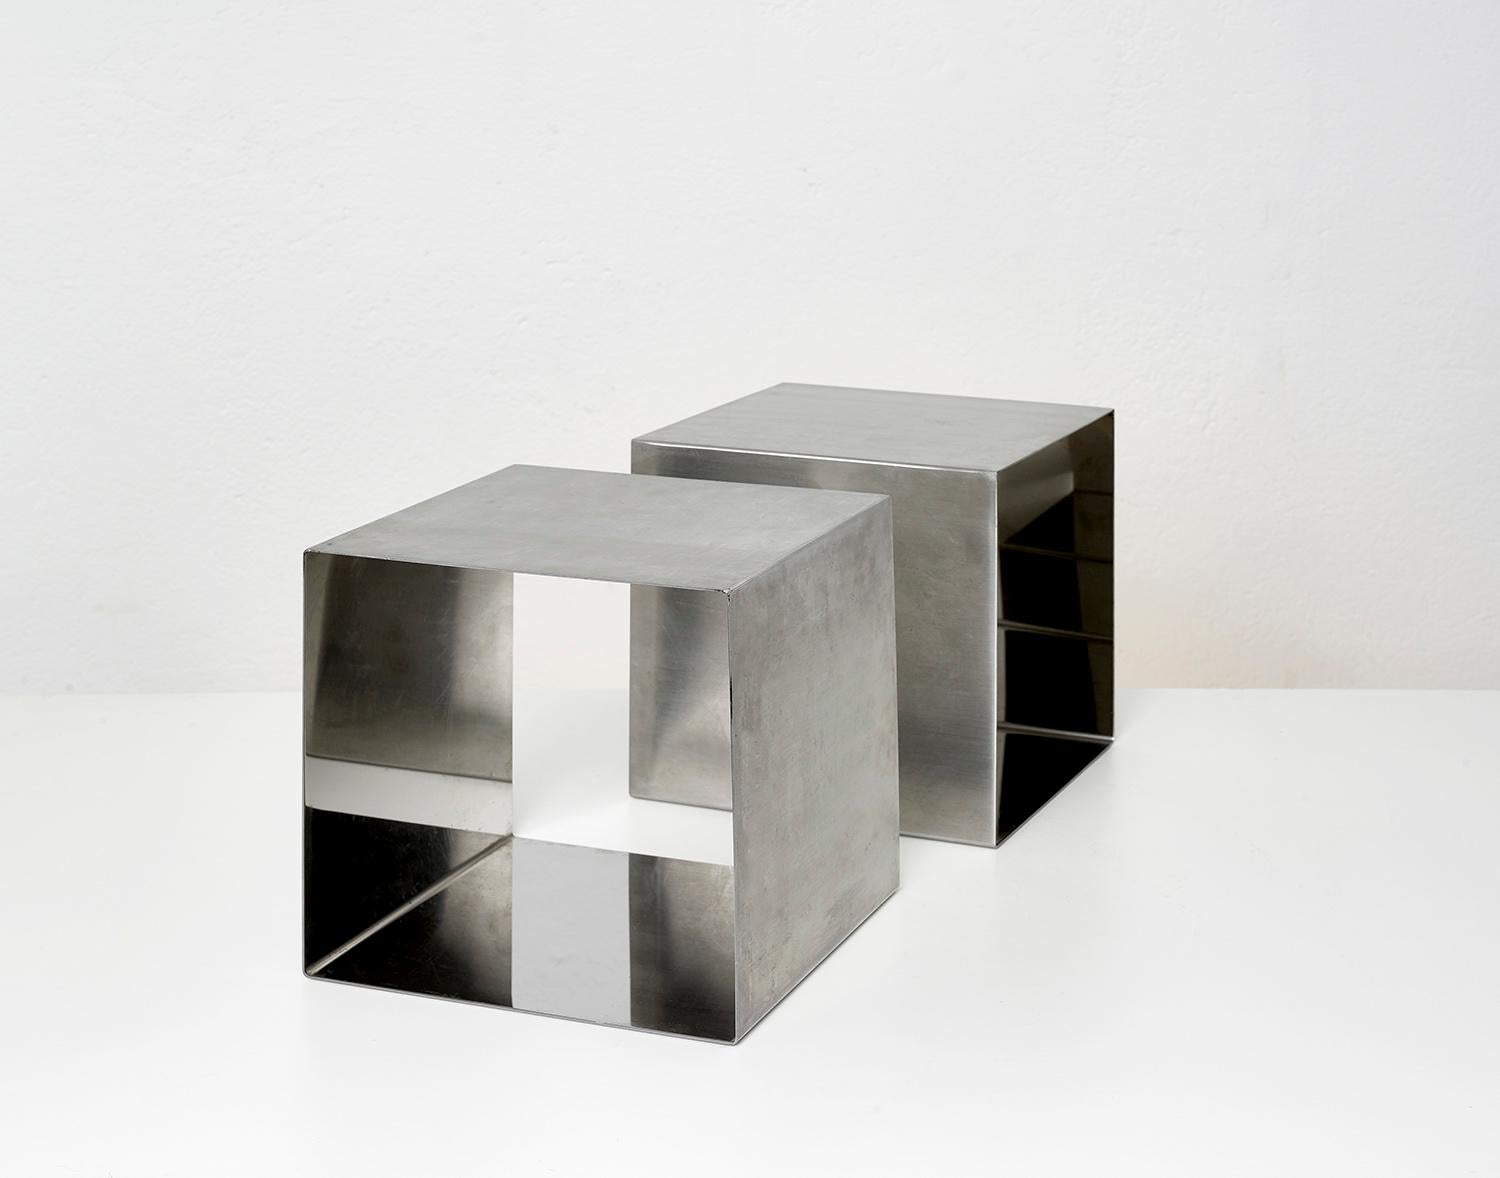 French Pair of Stainless Steel Cube Tables by Maria Pergay for Design Steel France 1968